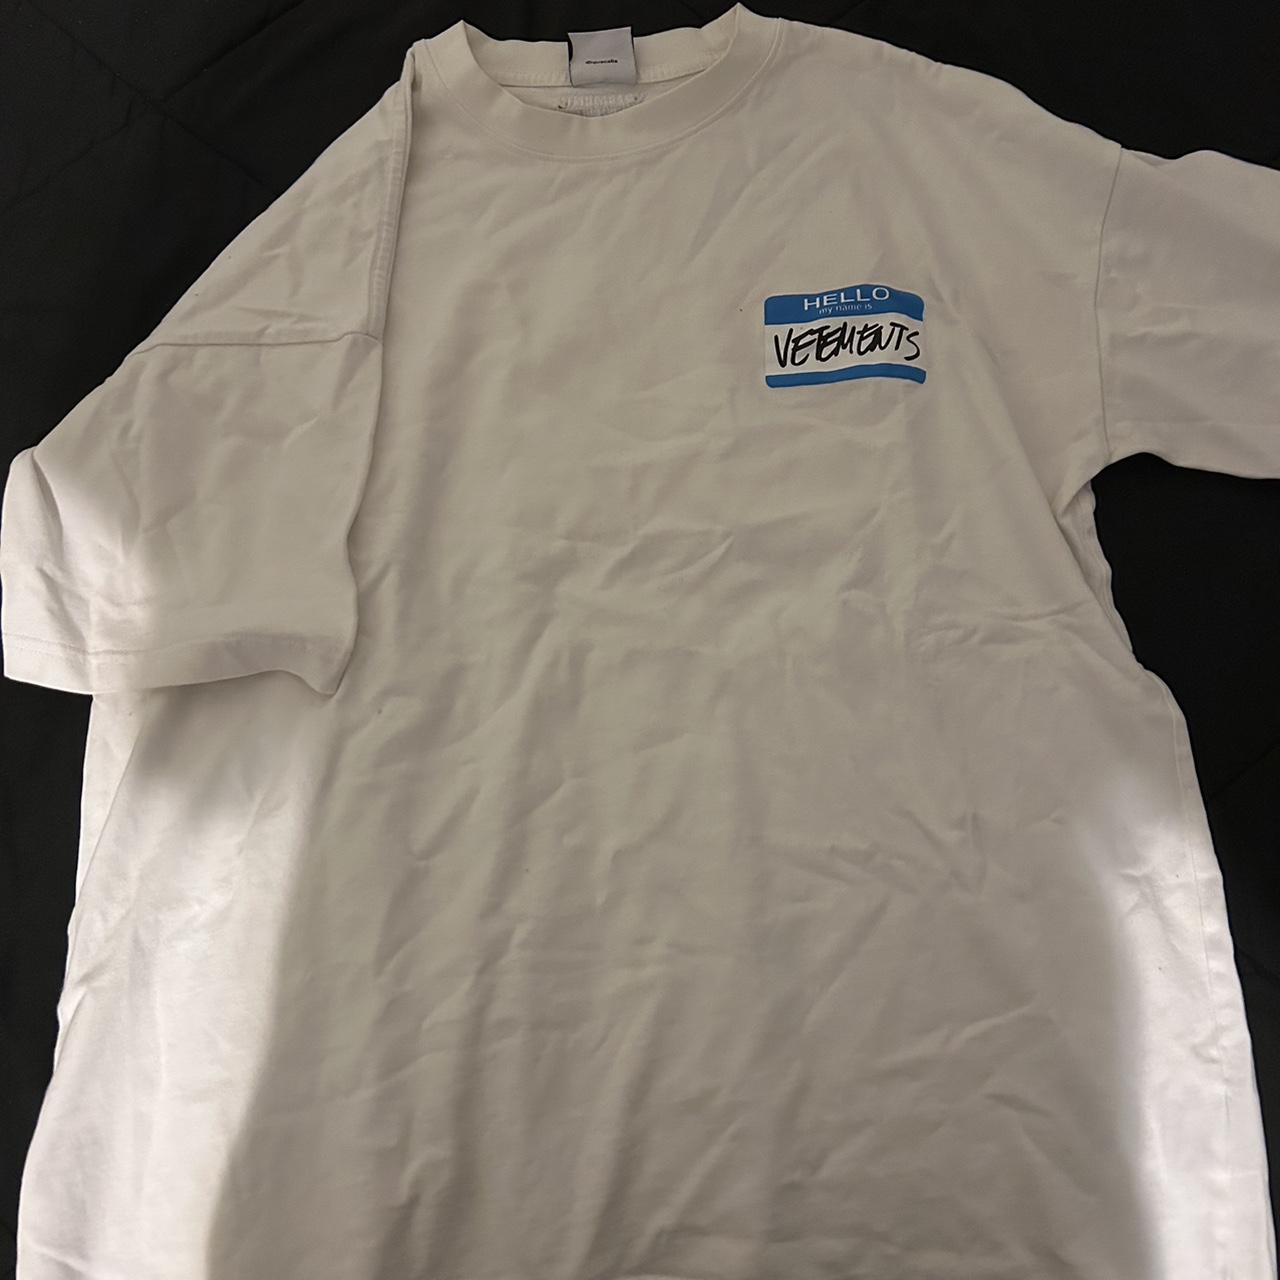 item listed by isseyboyy